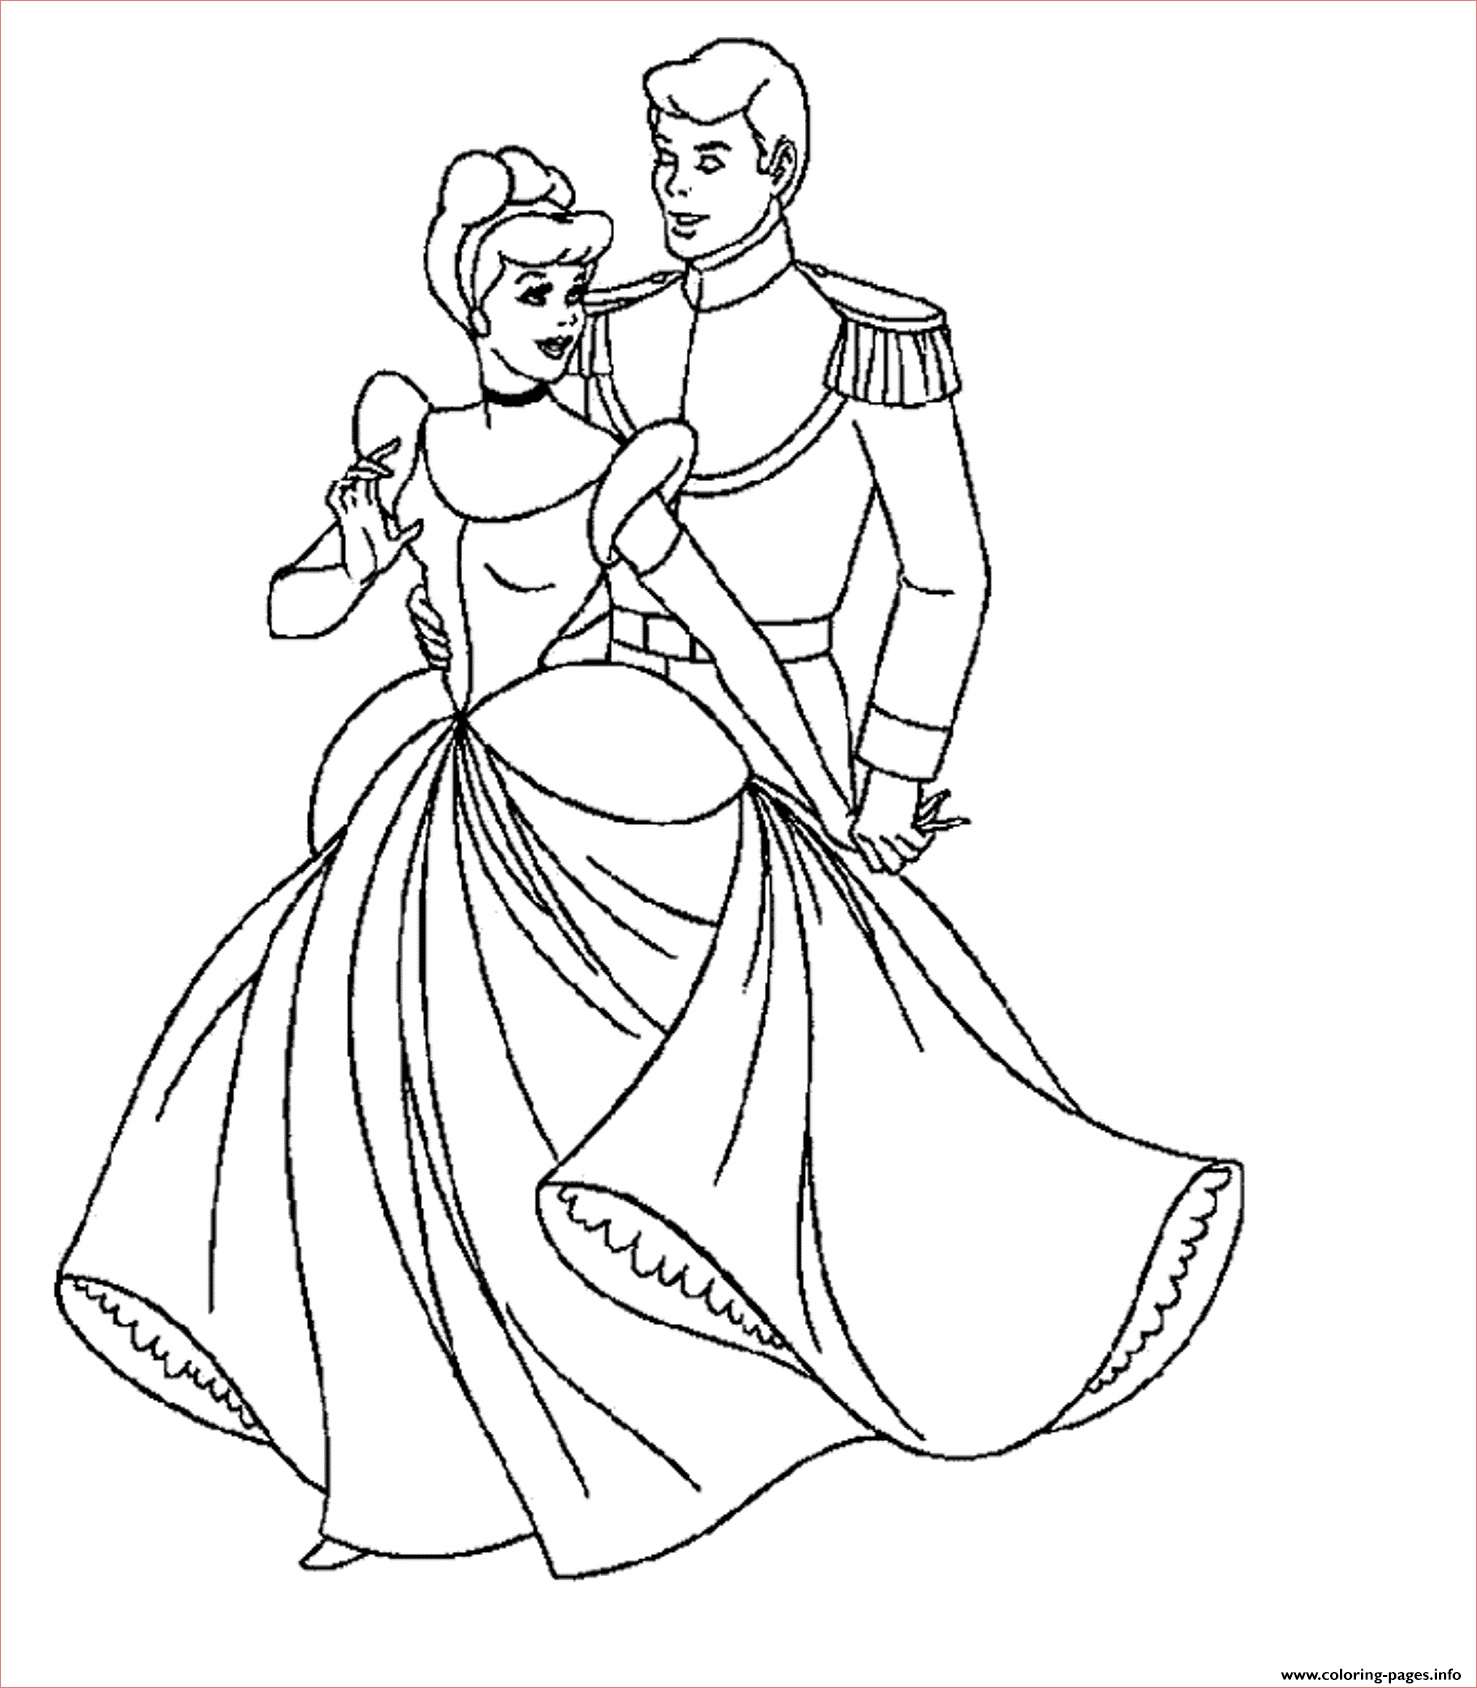 princess prince love cinderella s for kids8f1d printable coloring pages book 9171